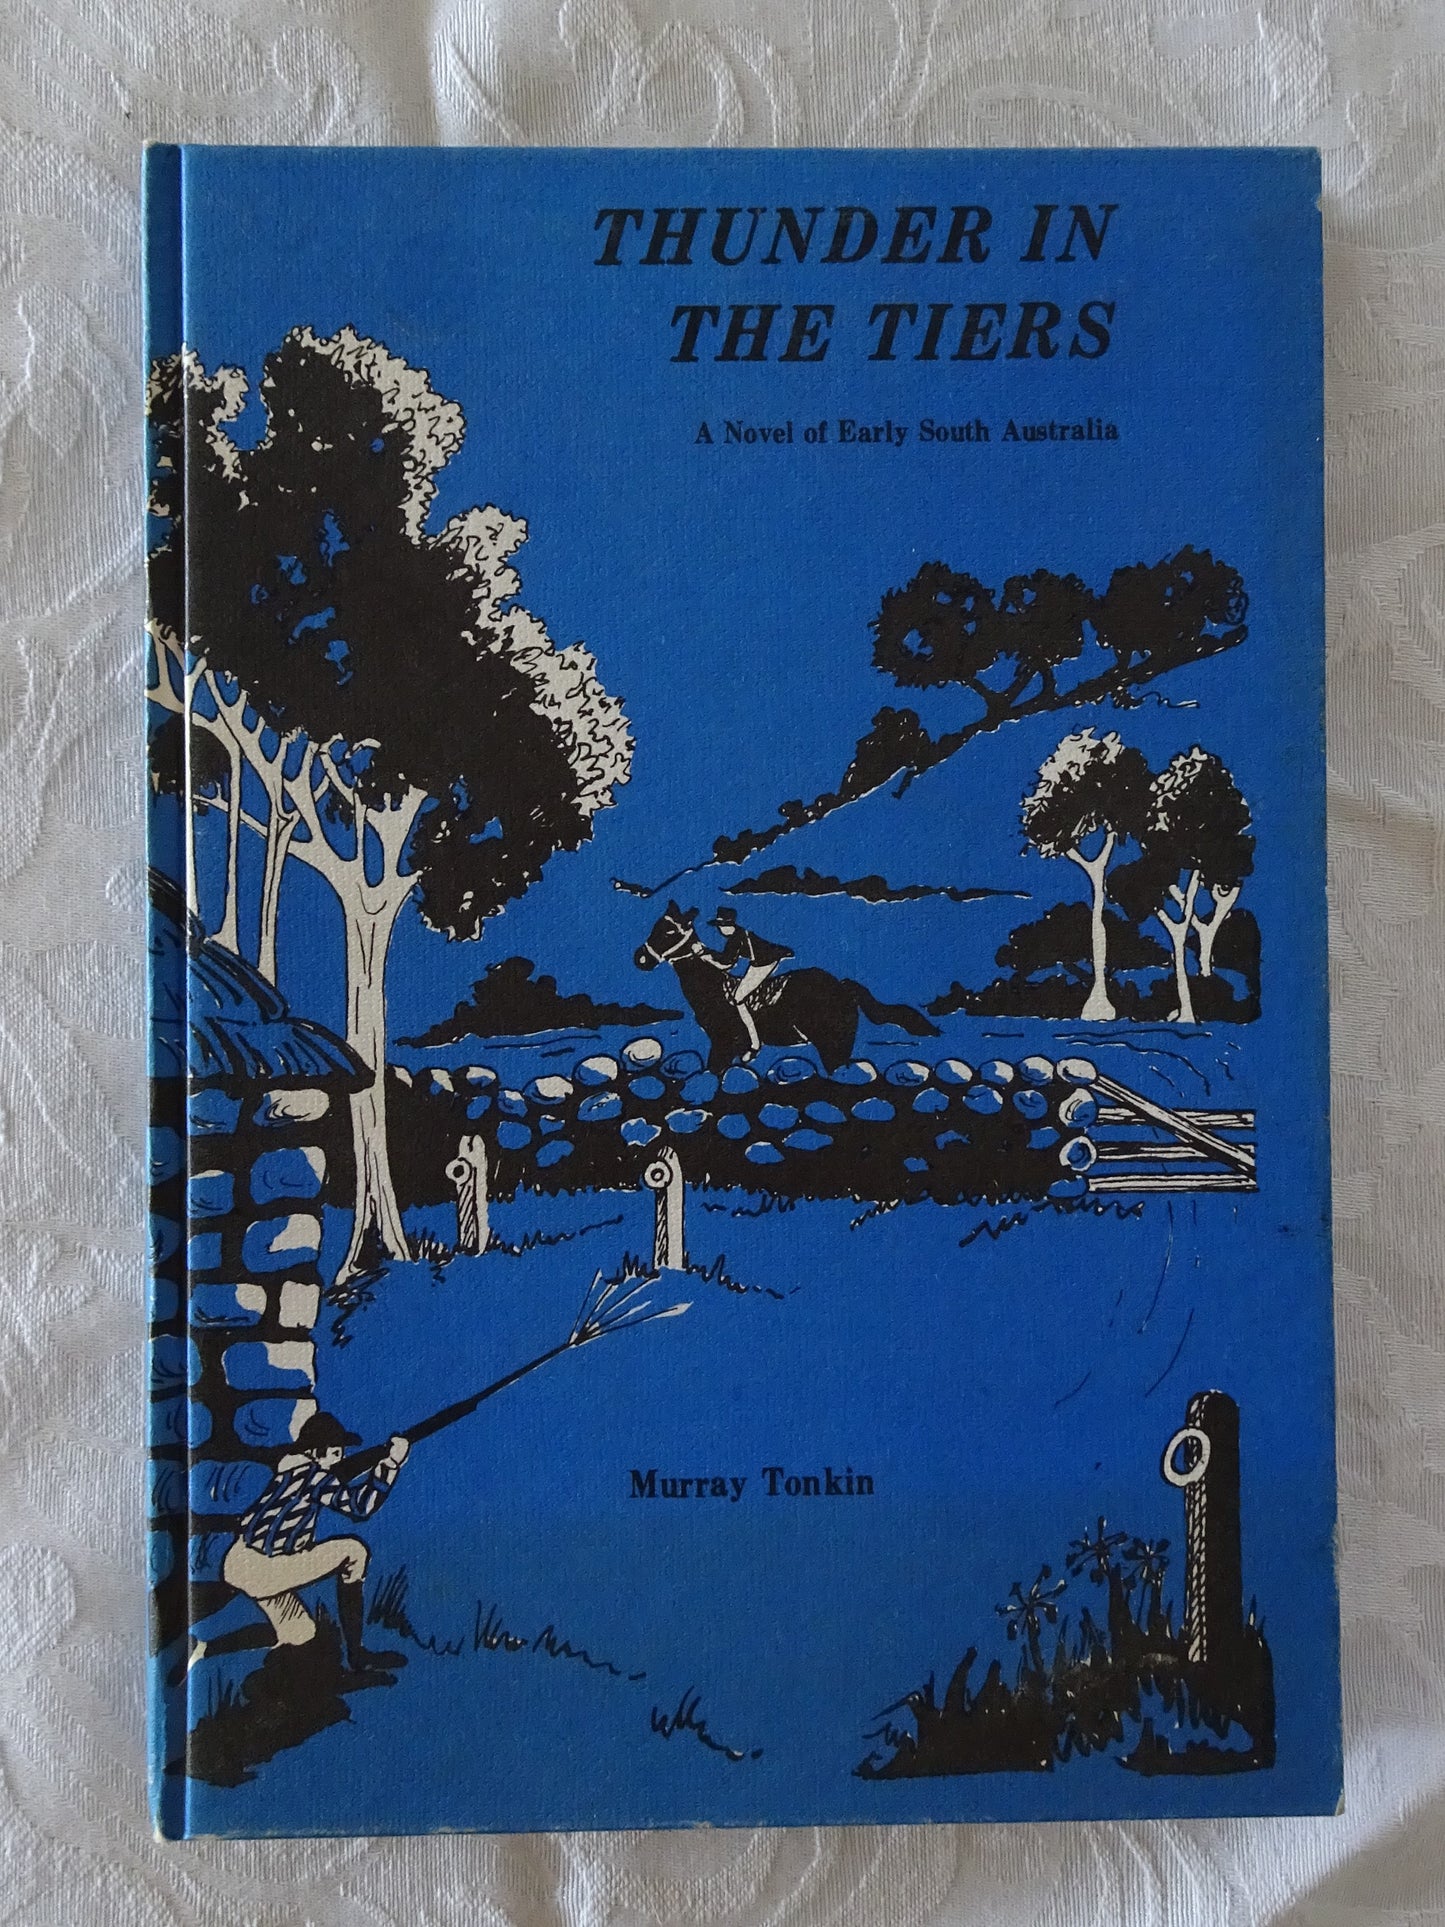 Thunder In The Tiers  A Novel of Early South Australia  by Murray Tonkin